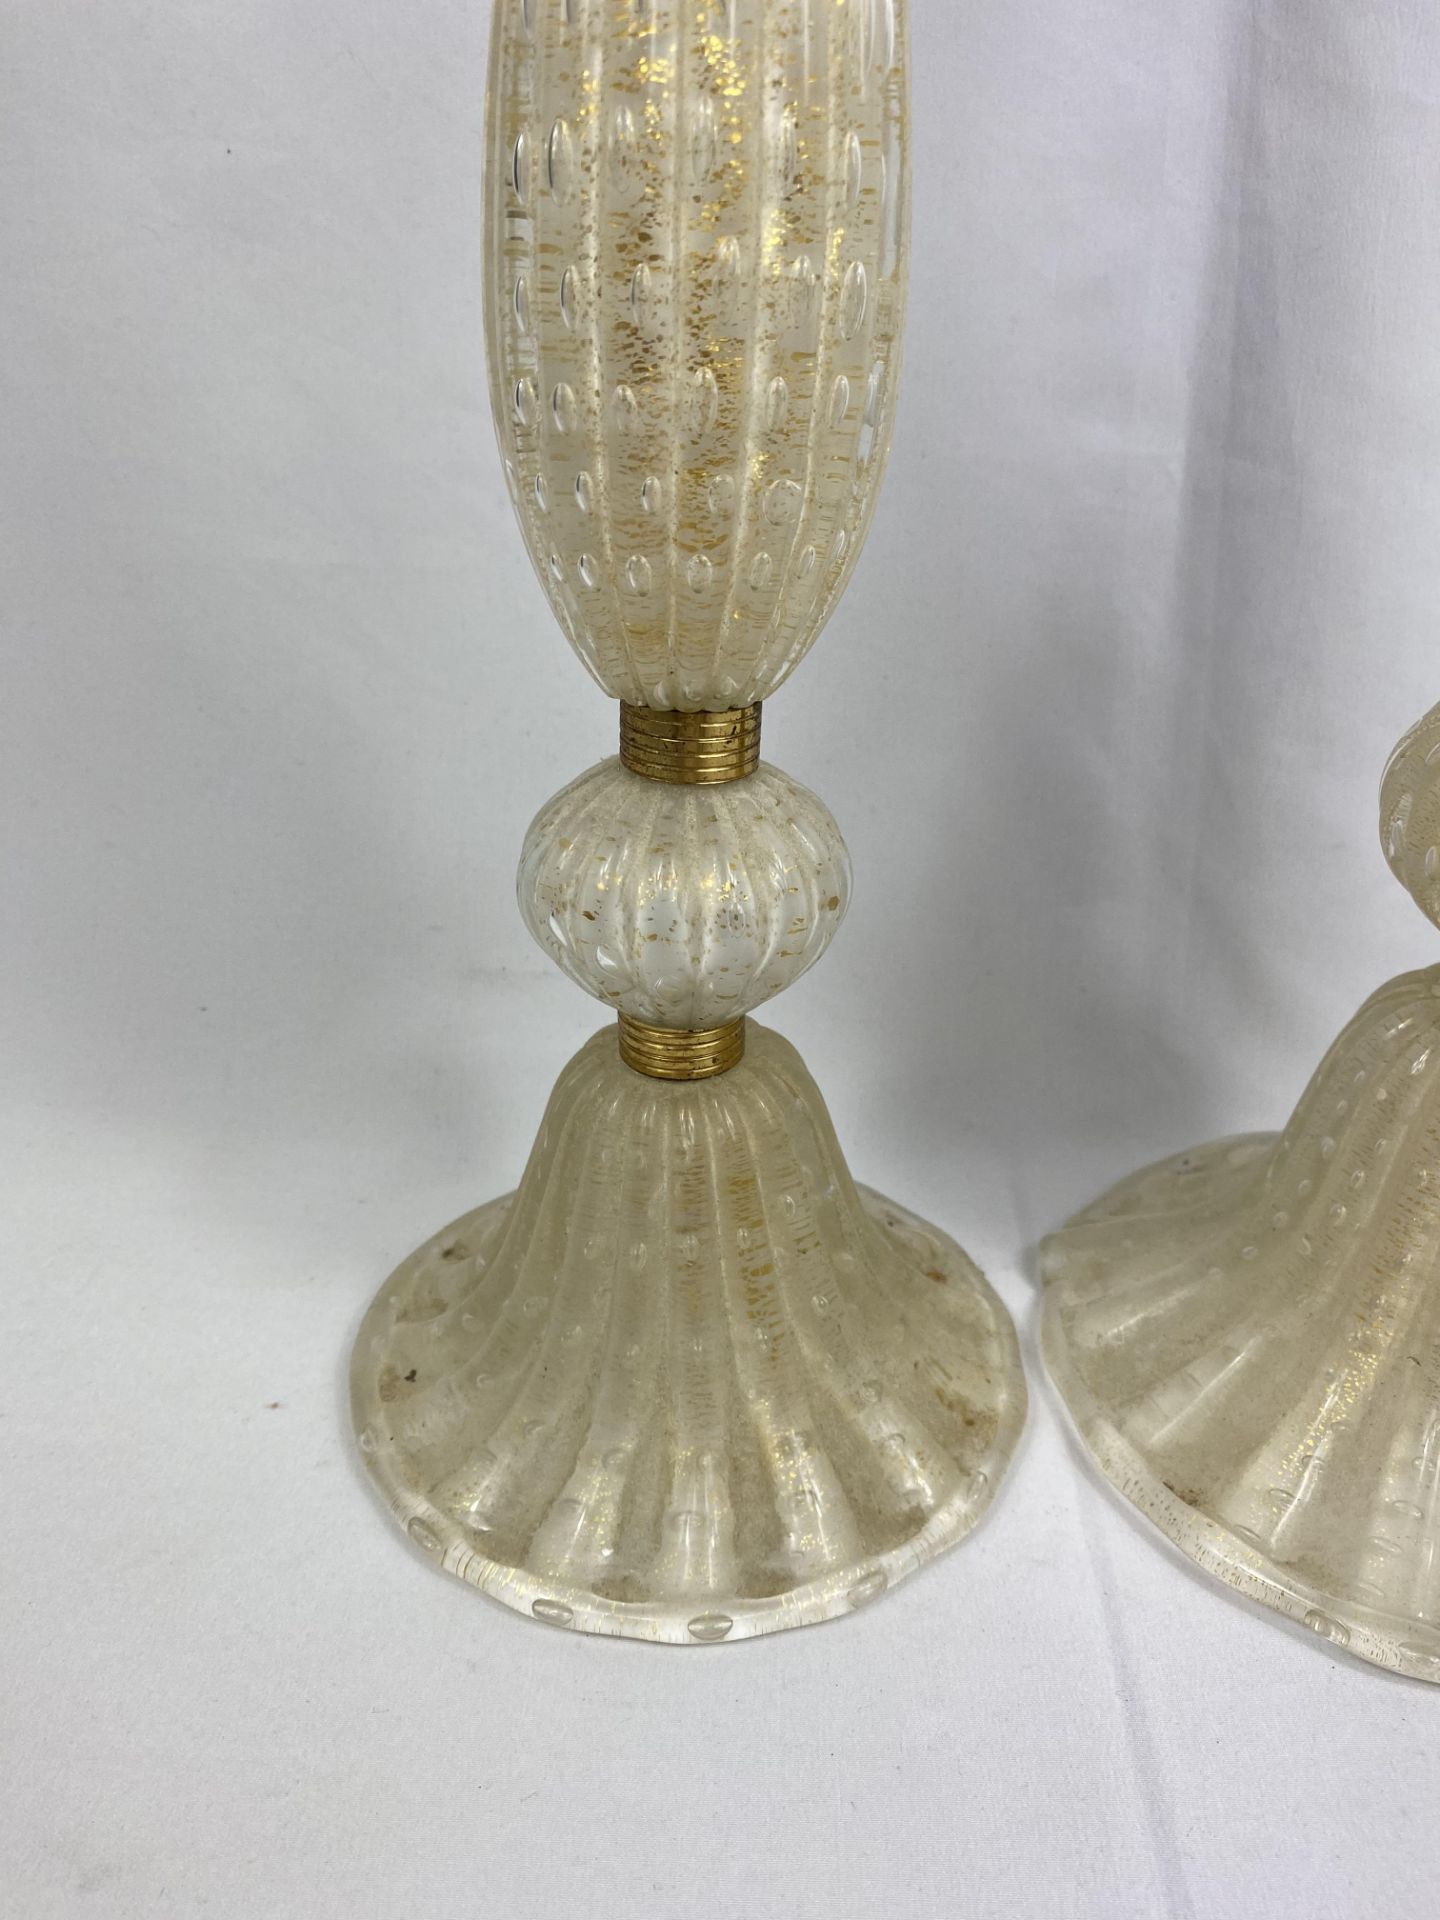 Pair of Barovier & Toso style Murano glass table lamps - Image 4 of 6